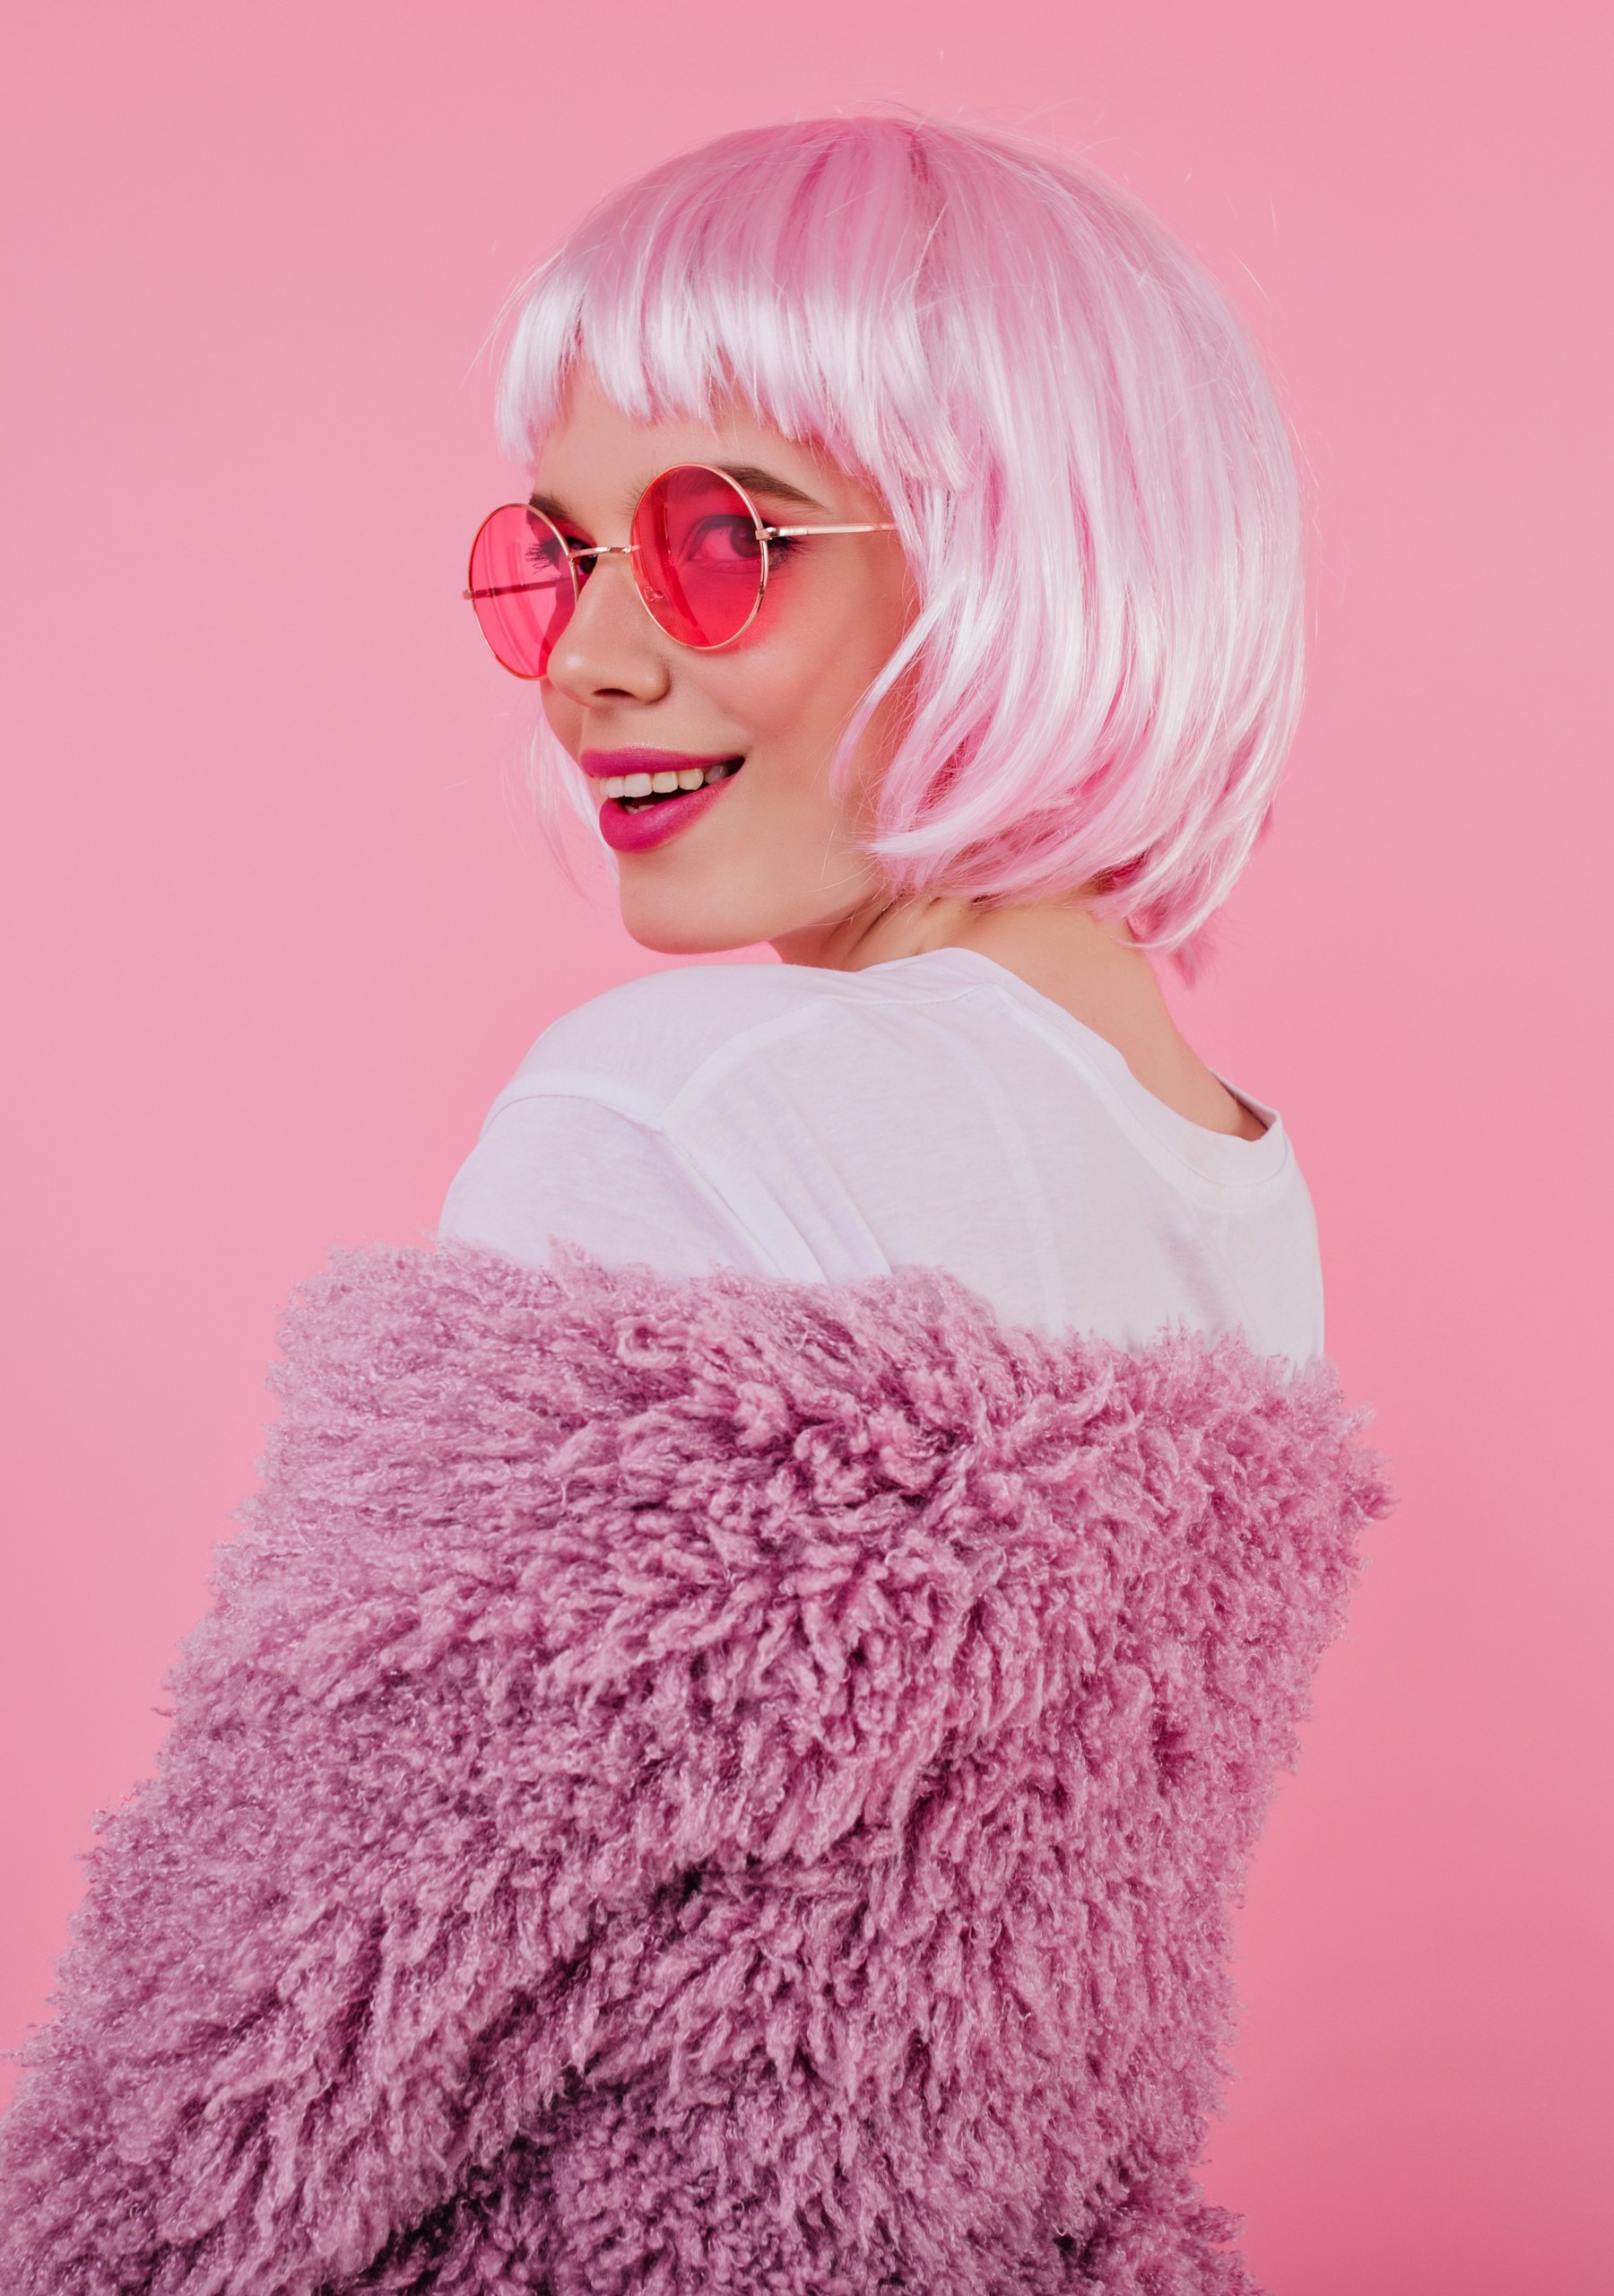 Portrait of playful girl in shiny pink peruke and sunglasses. Debonair caucasian woman looking over her shoulder with smile.